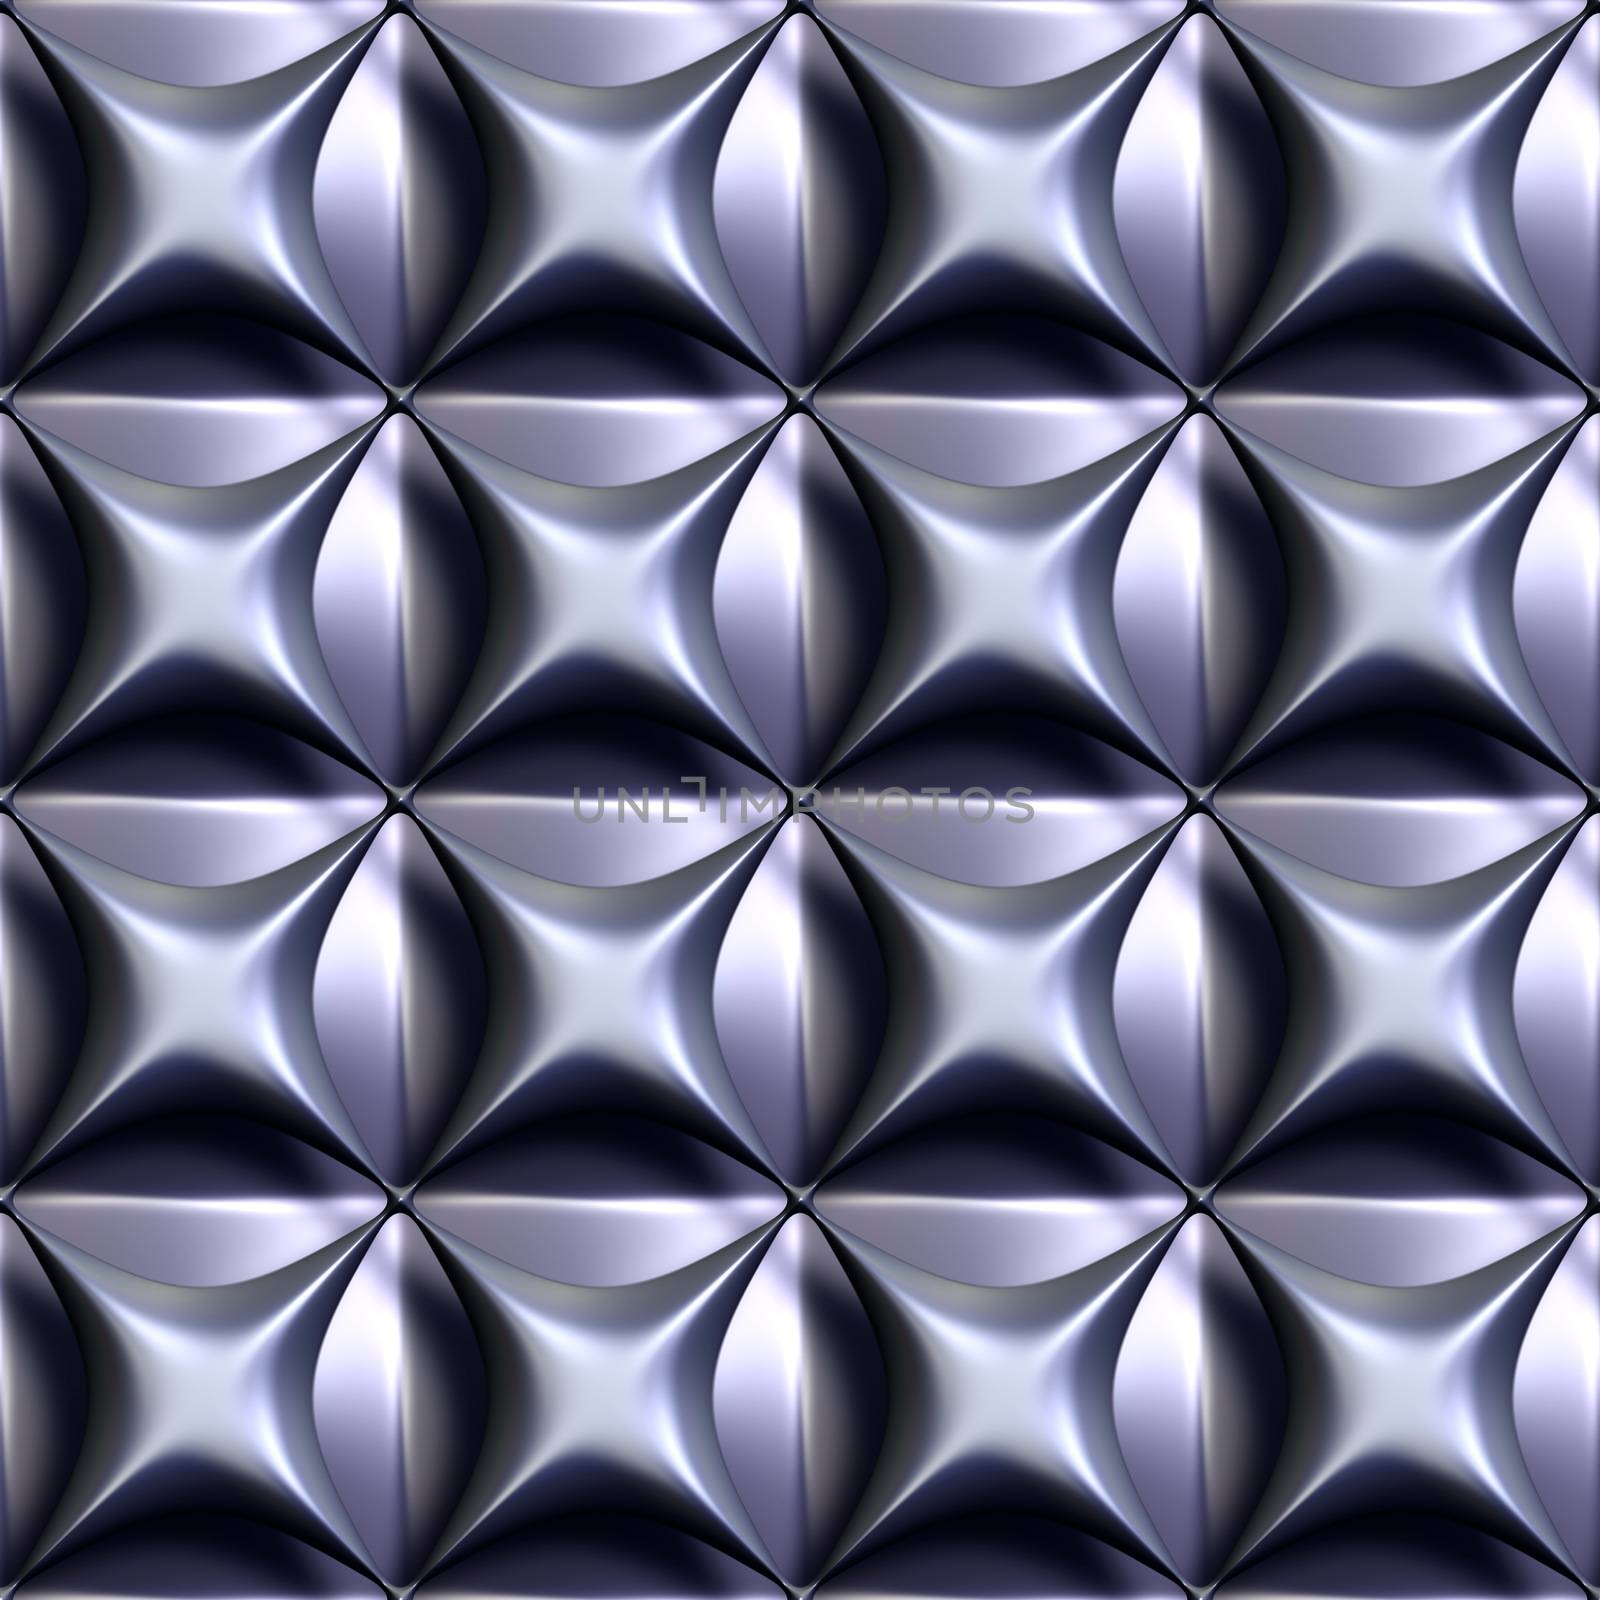 3d seamless tileable metal decorative background pattern.